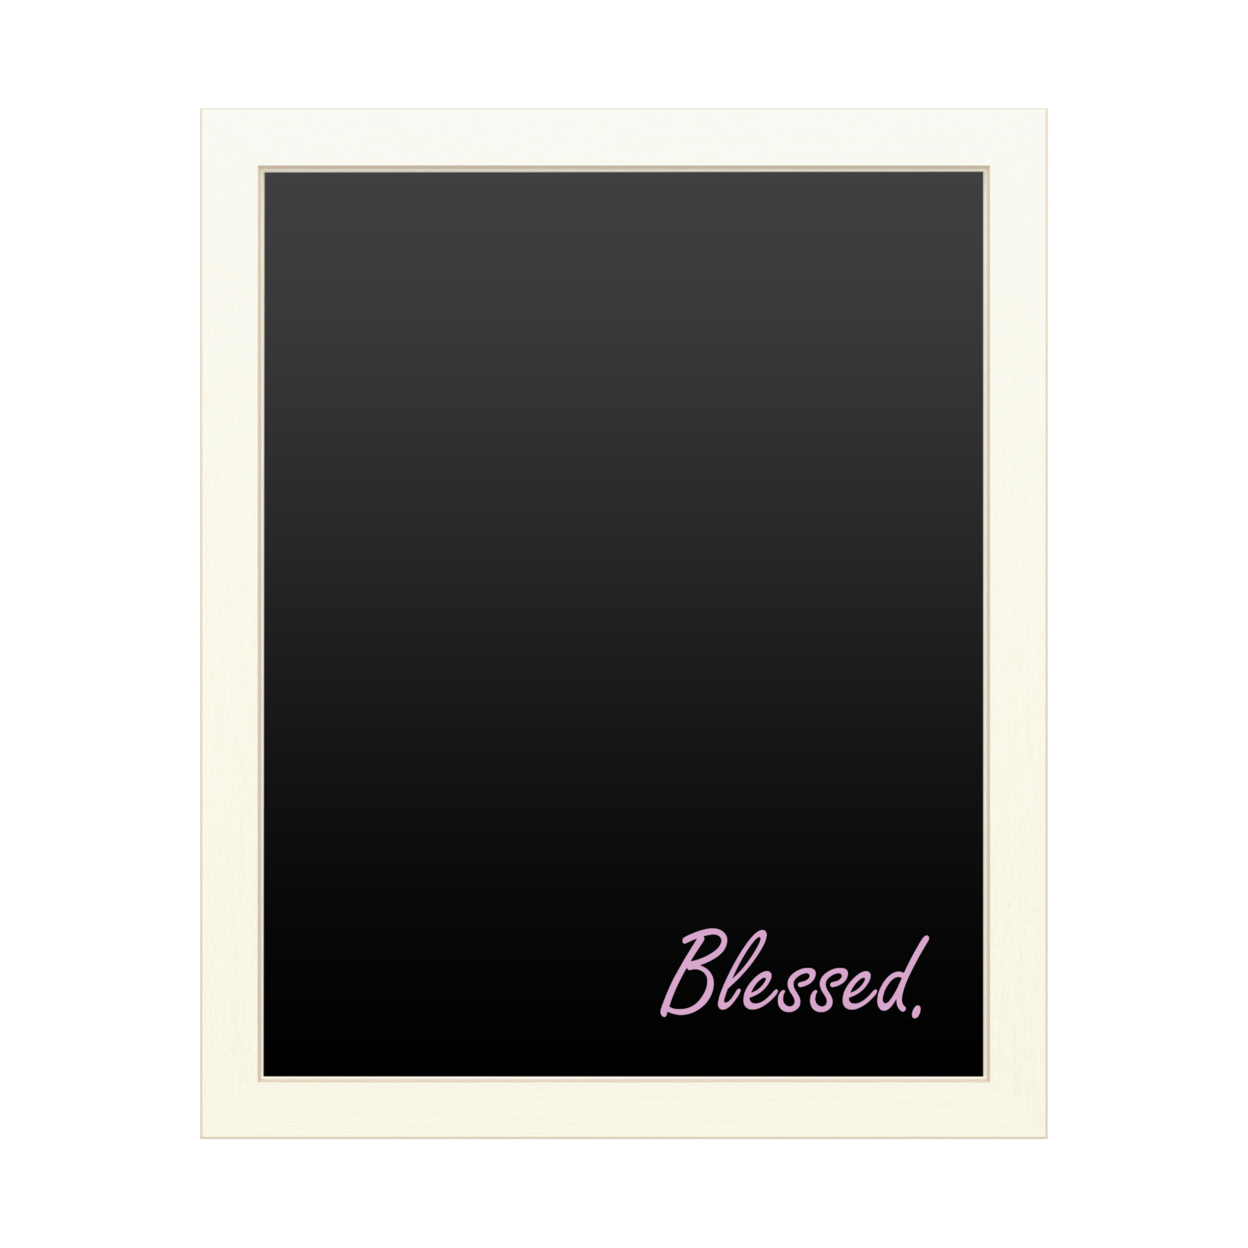 16 X 20 Chalk Board With Printed Artwork - Blessed Script Pink White Board - Ready To Hang Chalkboard